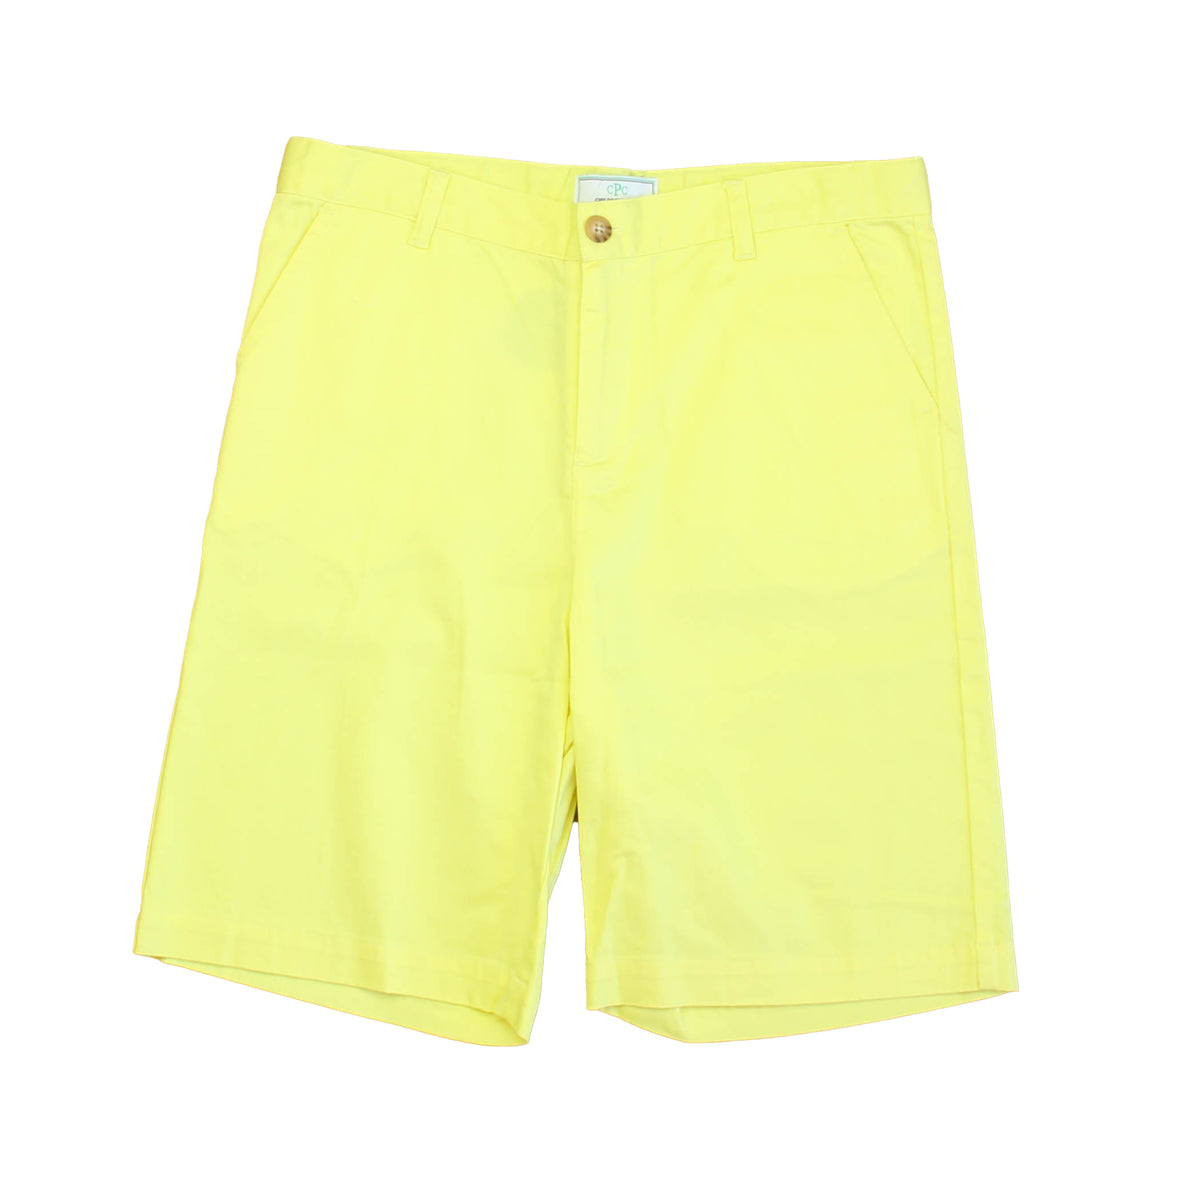 New with Tags: Yellow Shorts size: 6-14 Years -- FINAL SALE